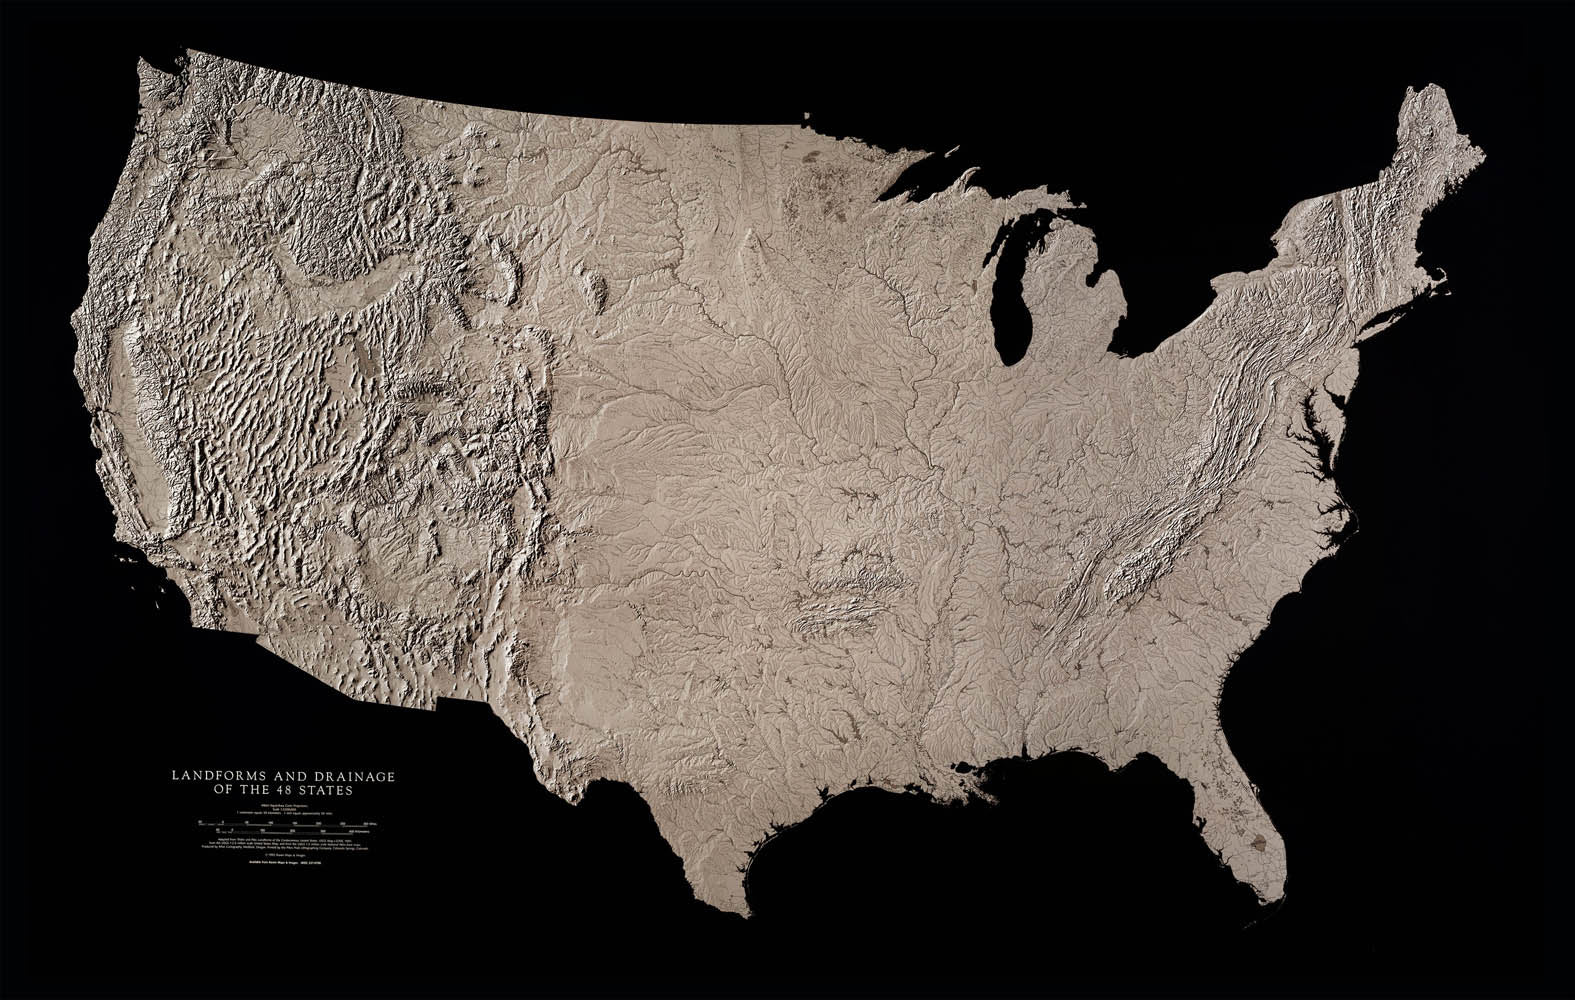 United States Landforms and Drainage Wall Map by Raven Maps, 37" x 58"